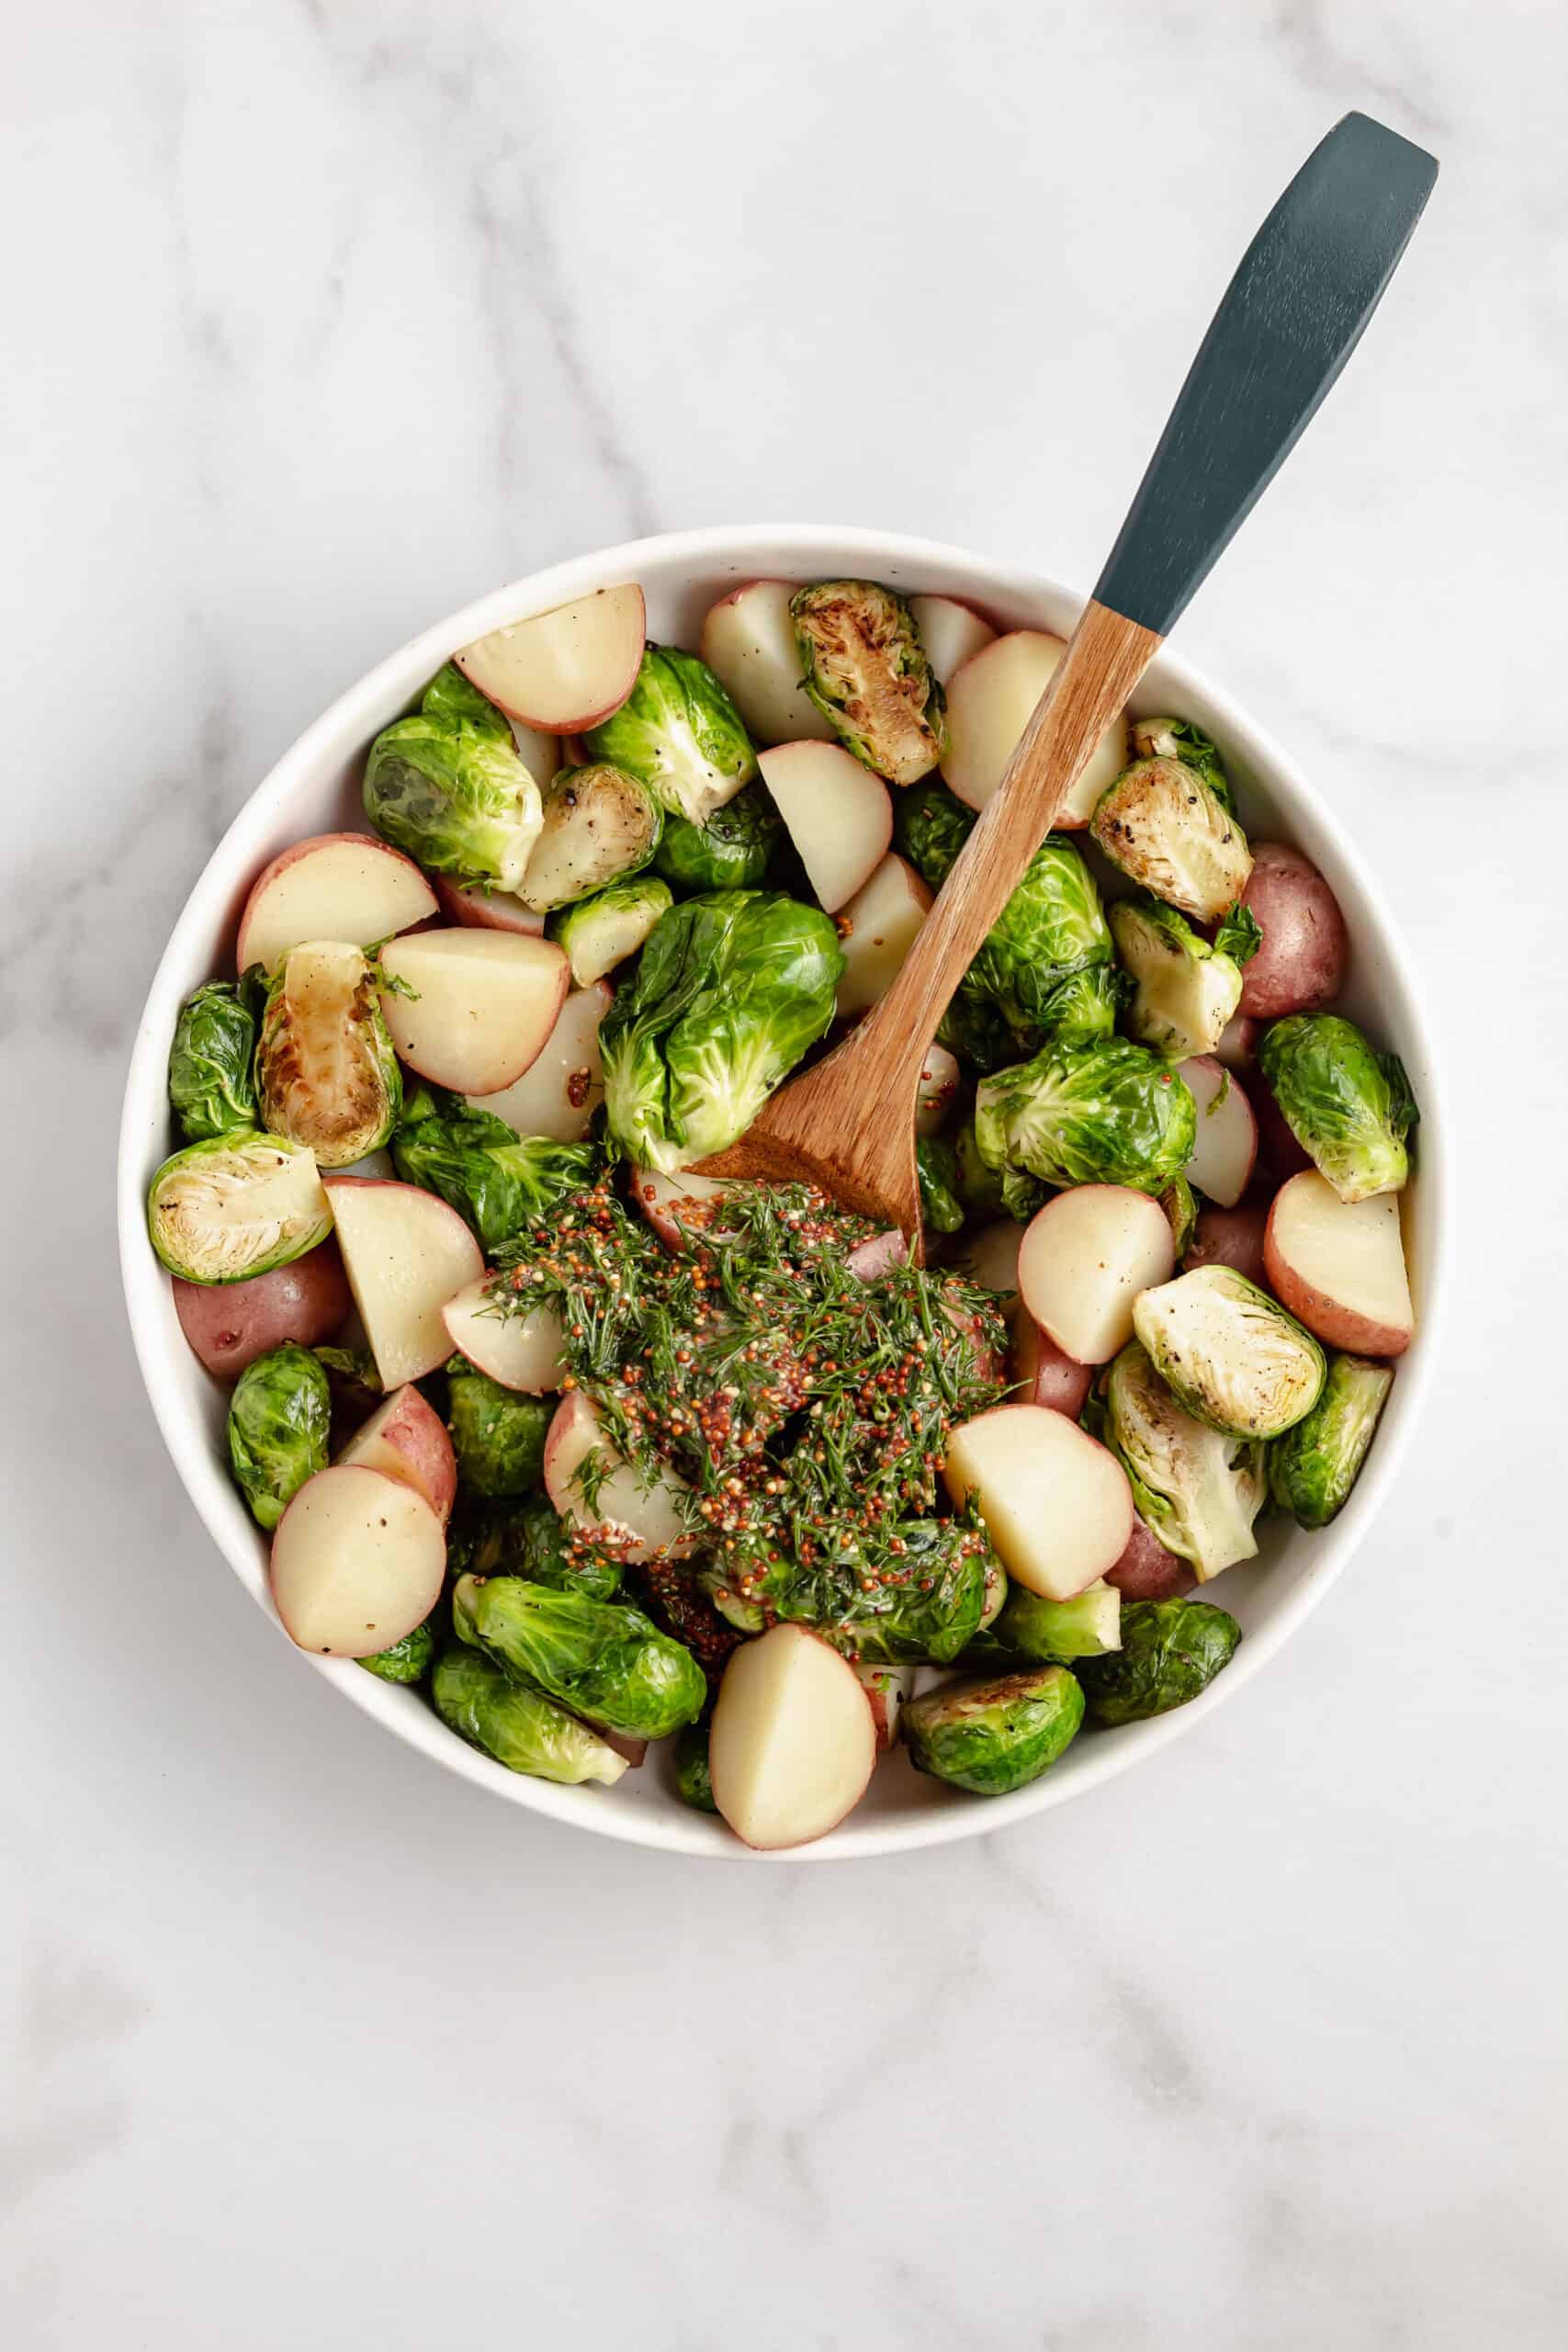 A white bowl with potatoes and Brussels sprouts topped with mustard dill dressing with a serving spoon.